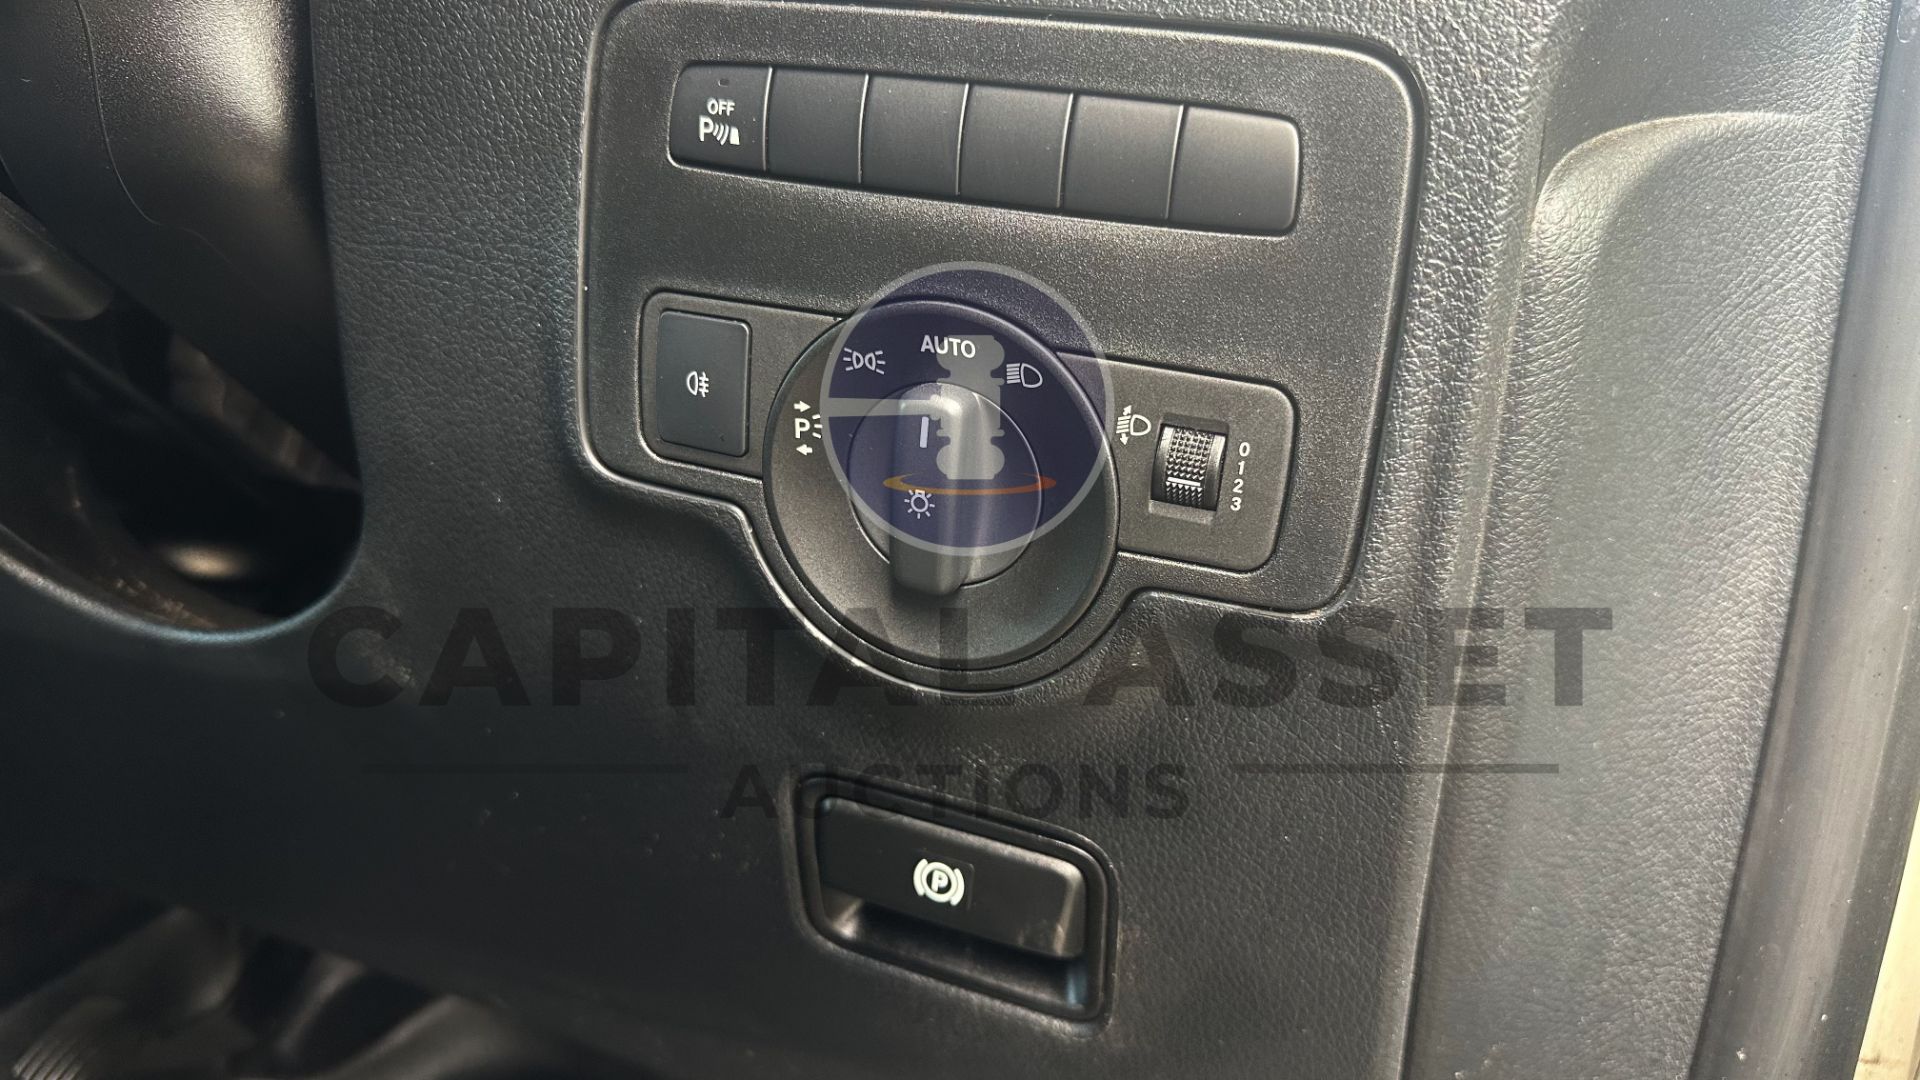 (ON SALE) MERCEDES-BENZ VITO 114 CDI *LWB - PANEL VAN* (2020) 7-G TRONIC AUTOMATIC (1 OWNER) *A/C* - Image 27 of 43